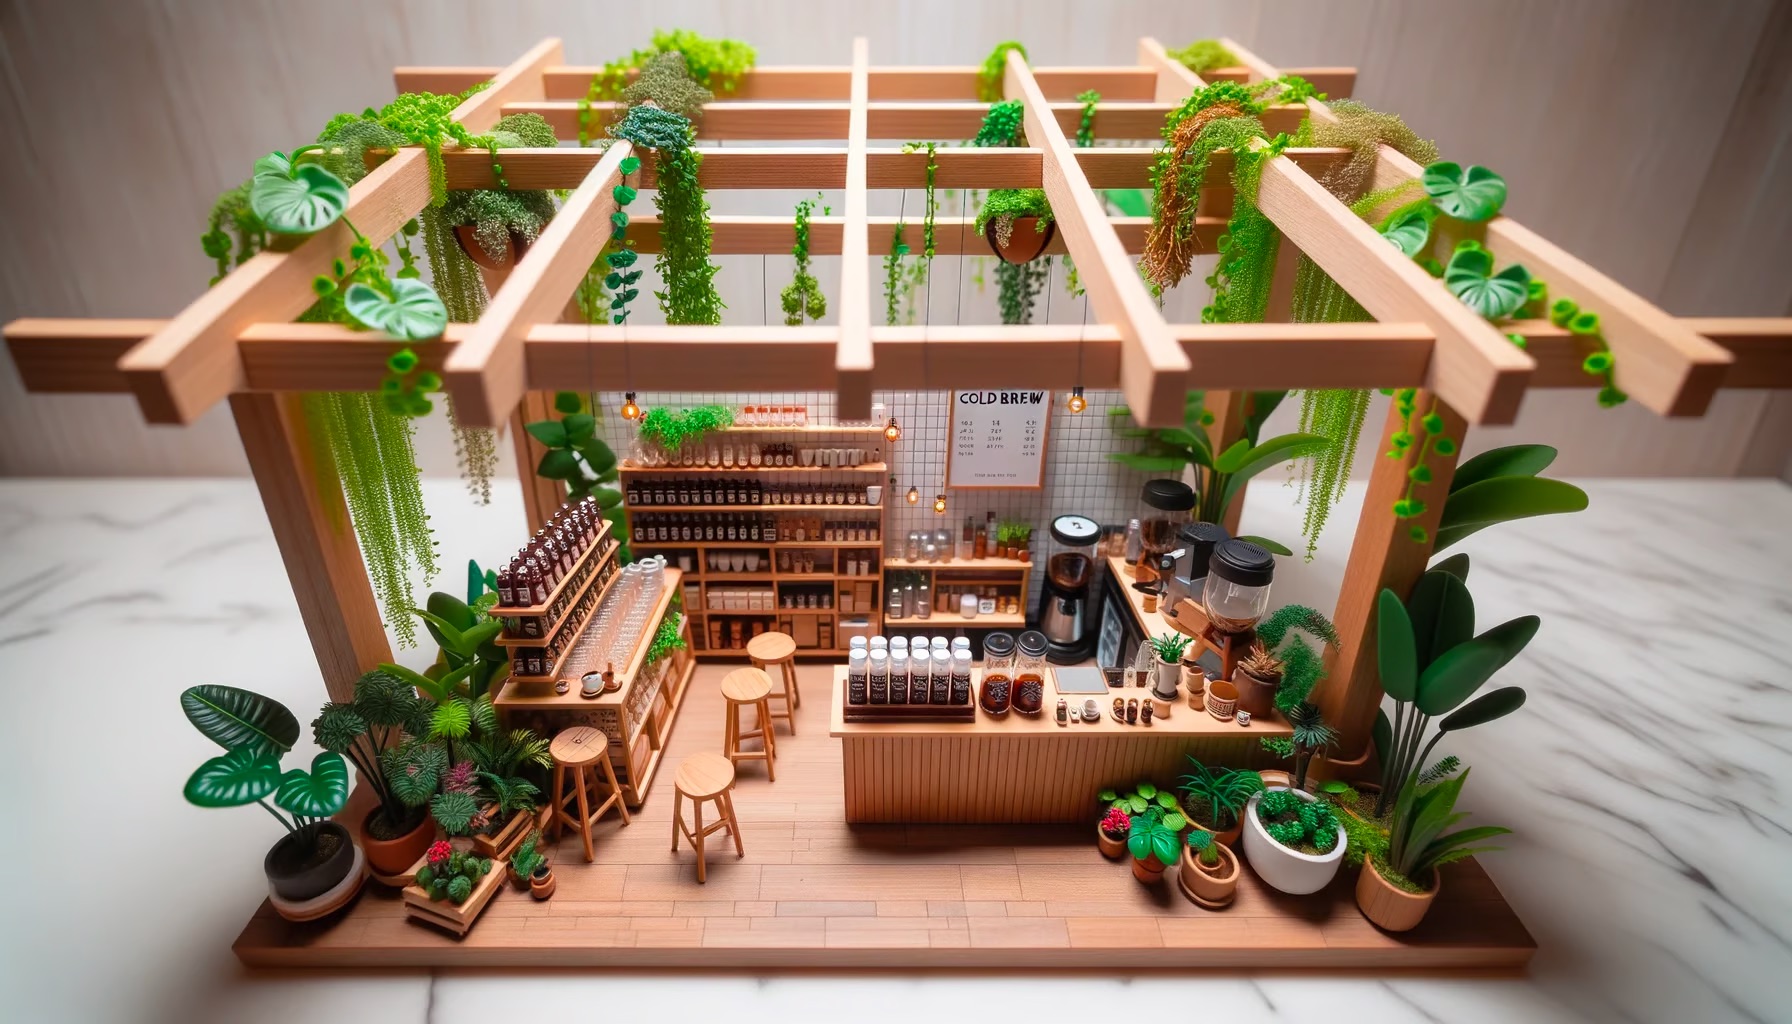 Dall-e 3: A minimap diorama of a cafe adorned with indoor plants. Wooden beams crisscross above, and a cold brew station stands out with tiny bottles and glasses.